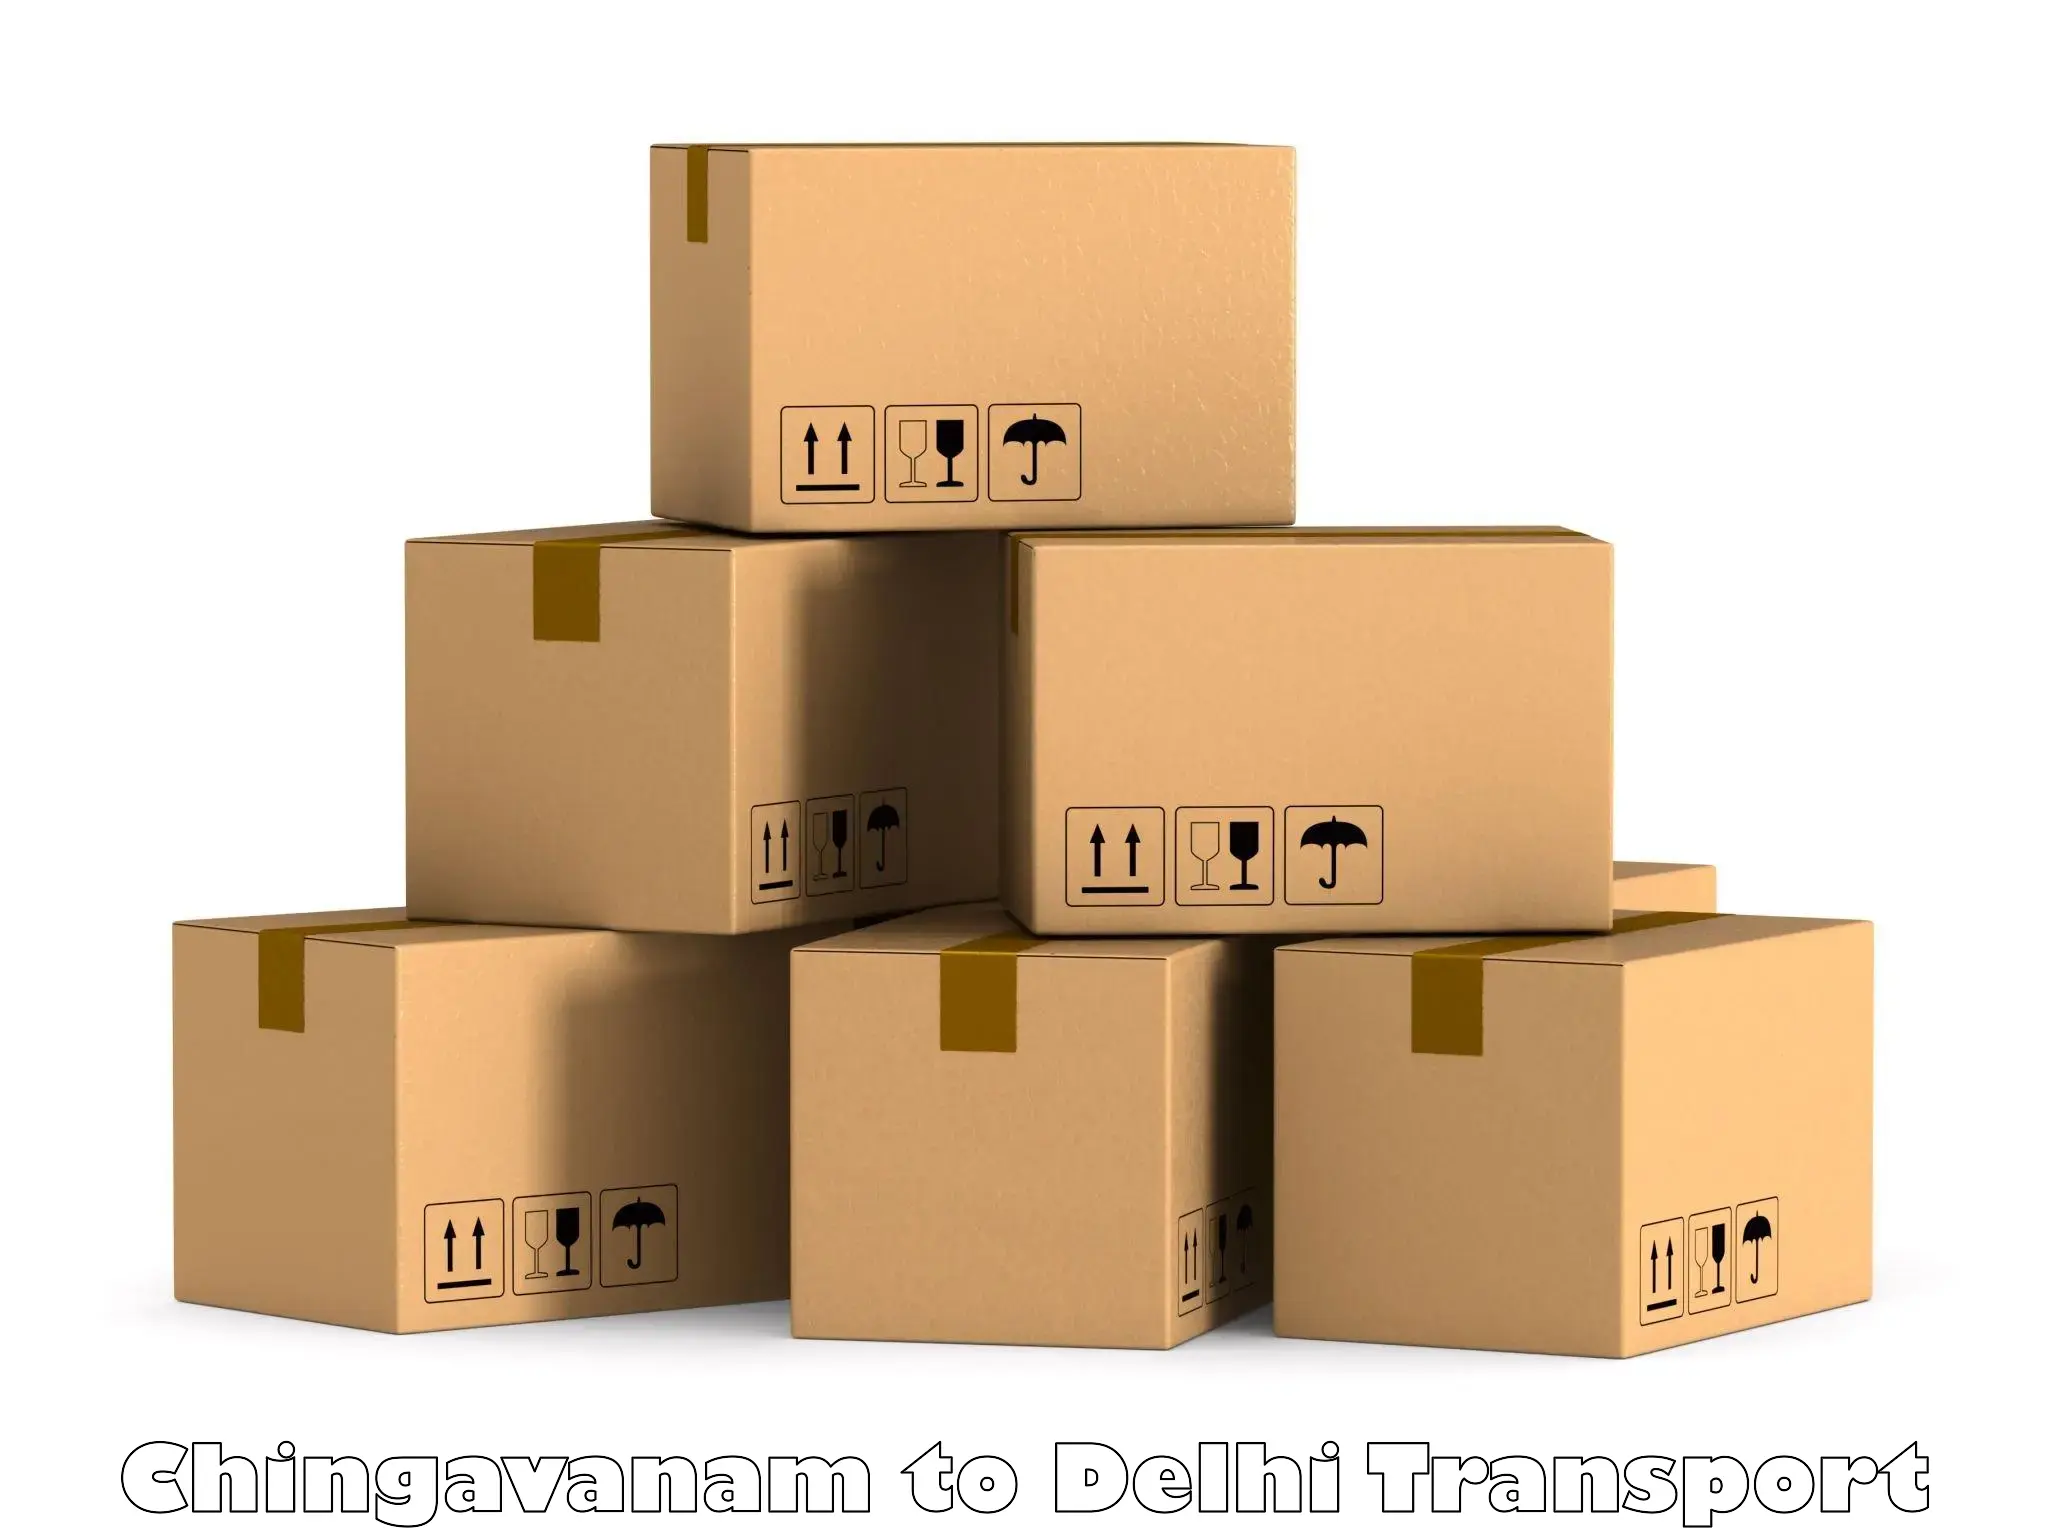 Parcel transport services Chingavanam to NCR